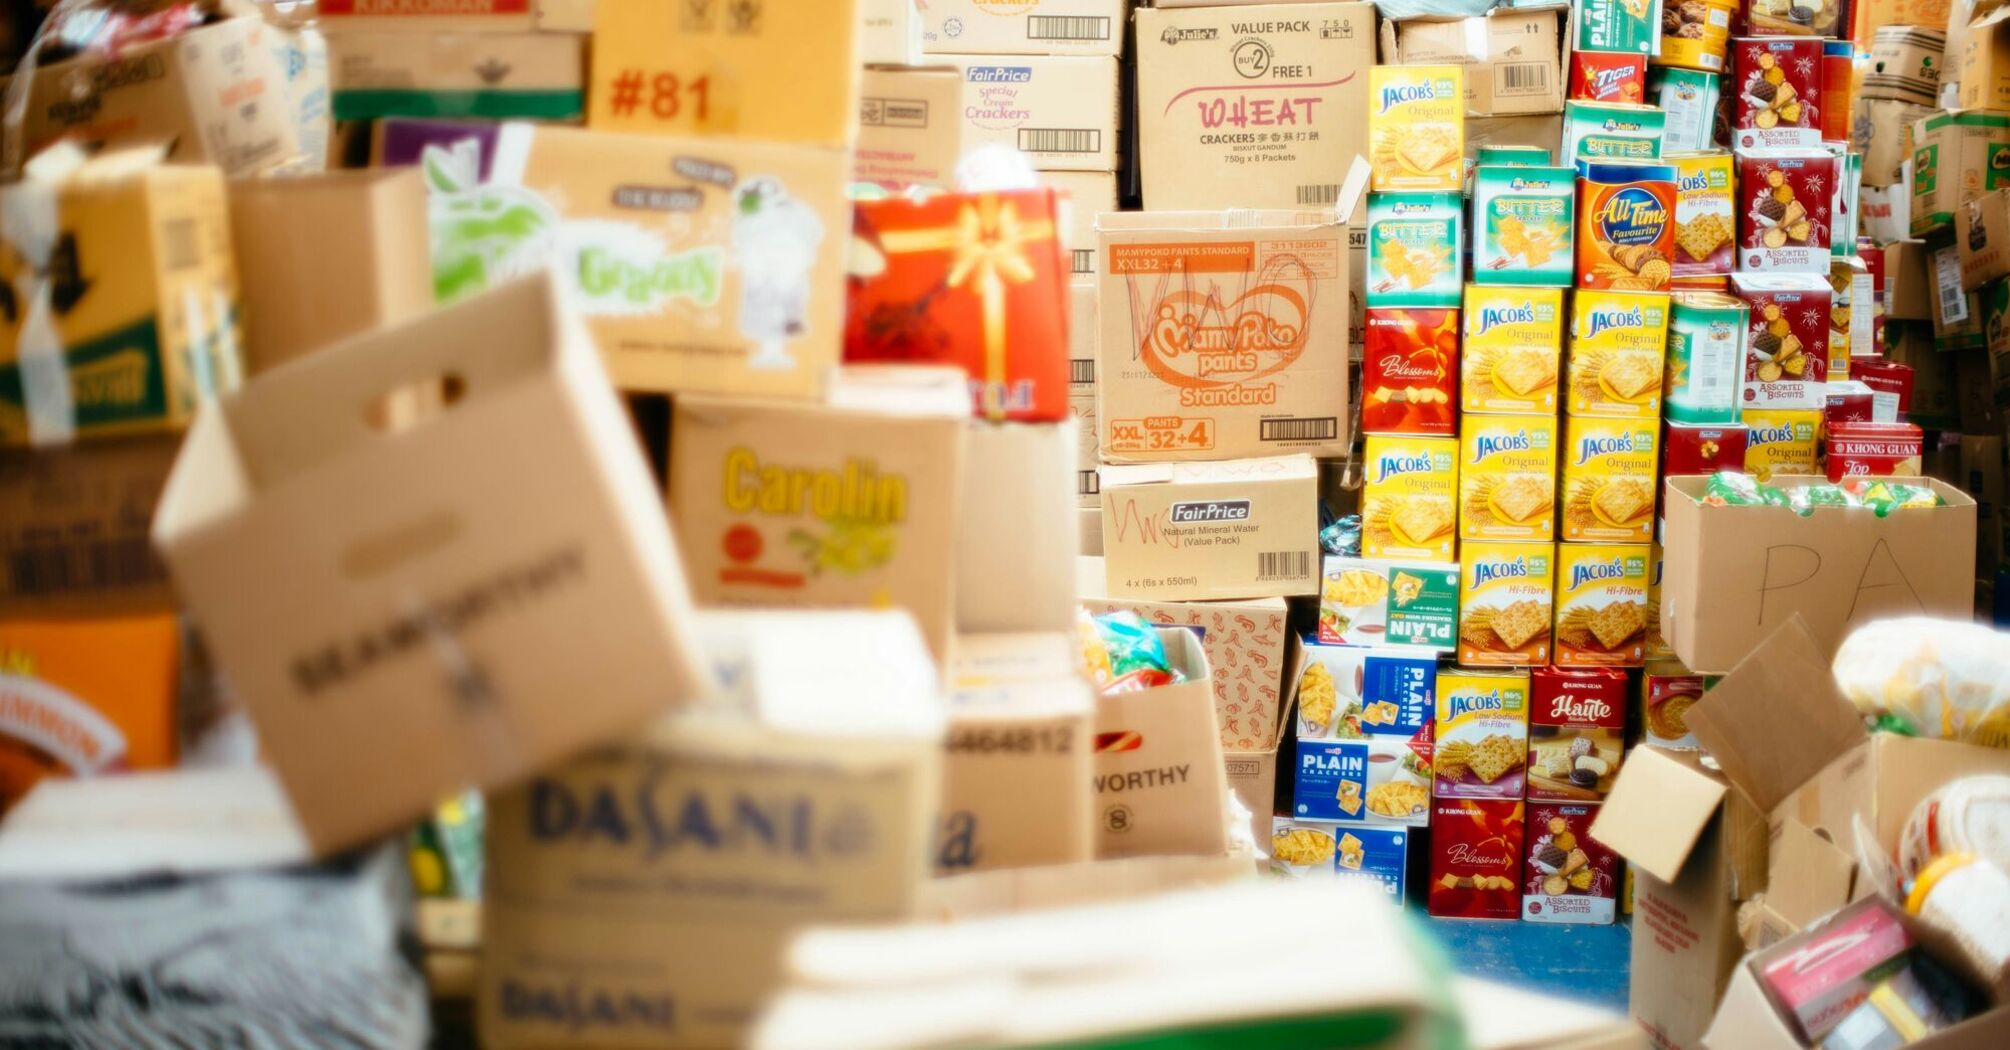 A variety of food items in multiple cardboard boxes in a storage area